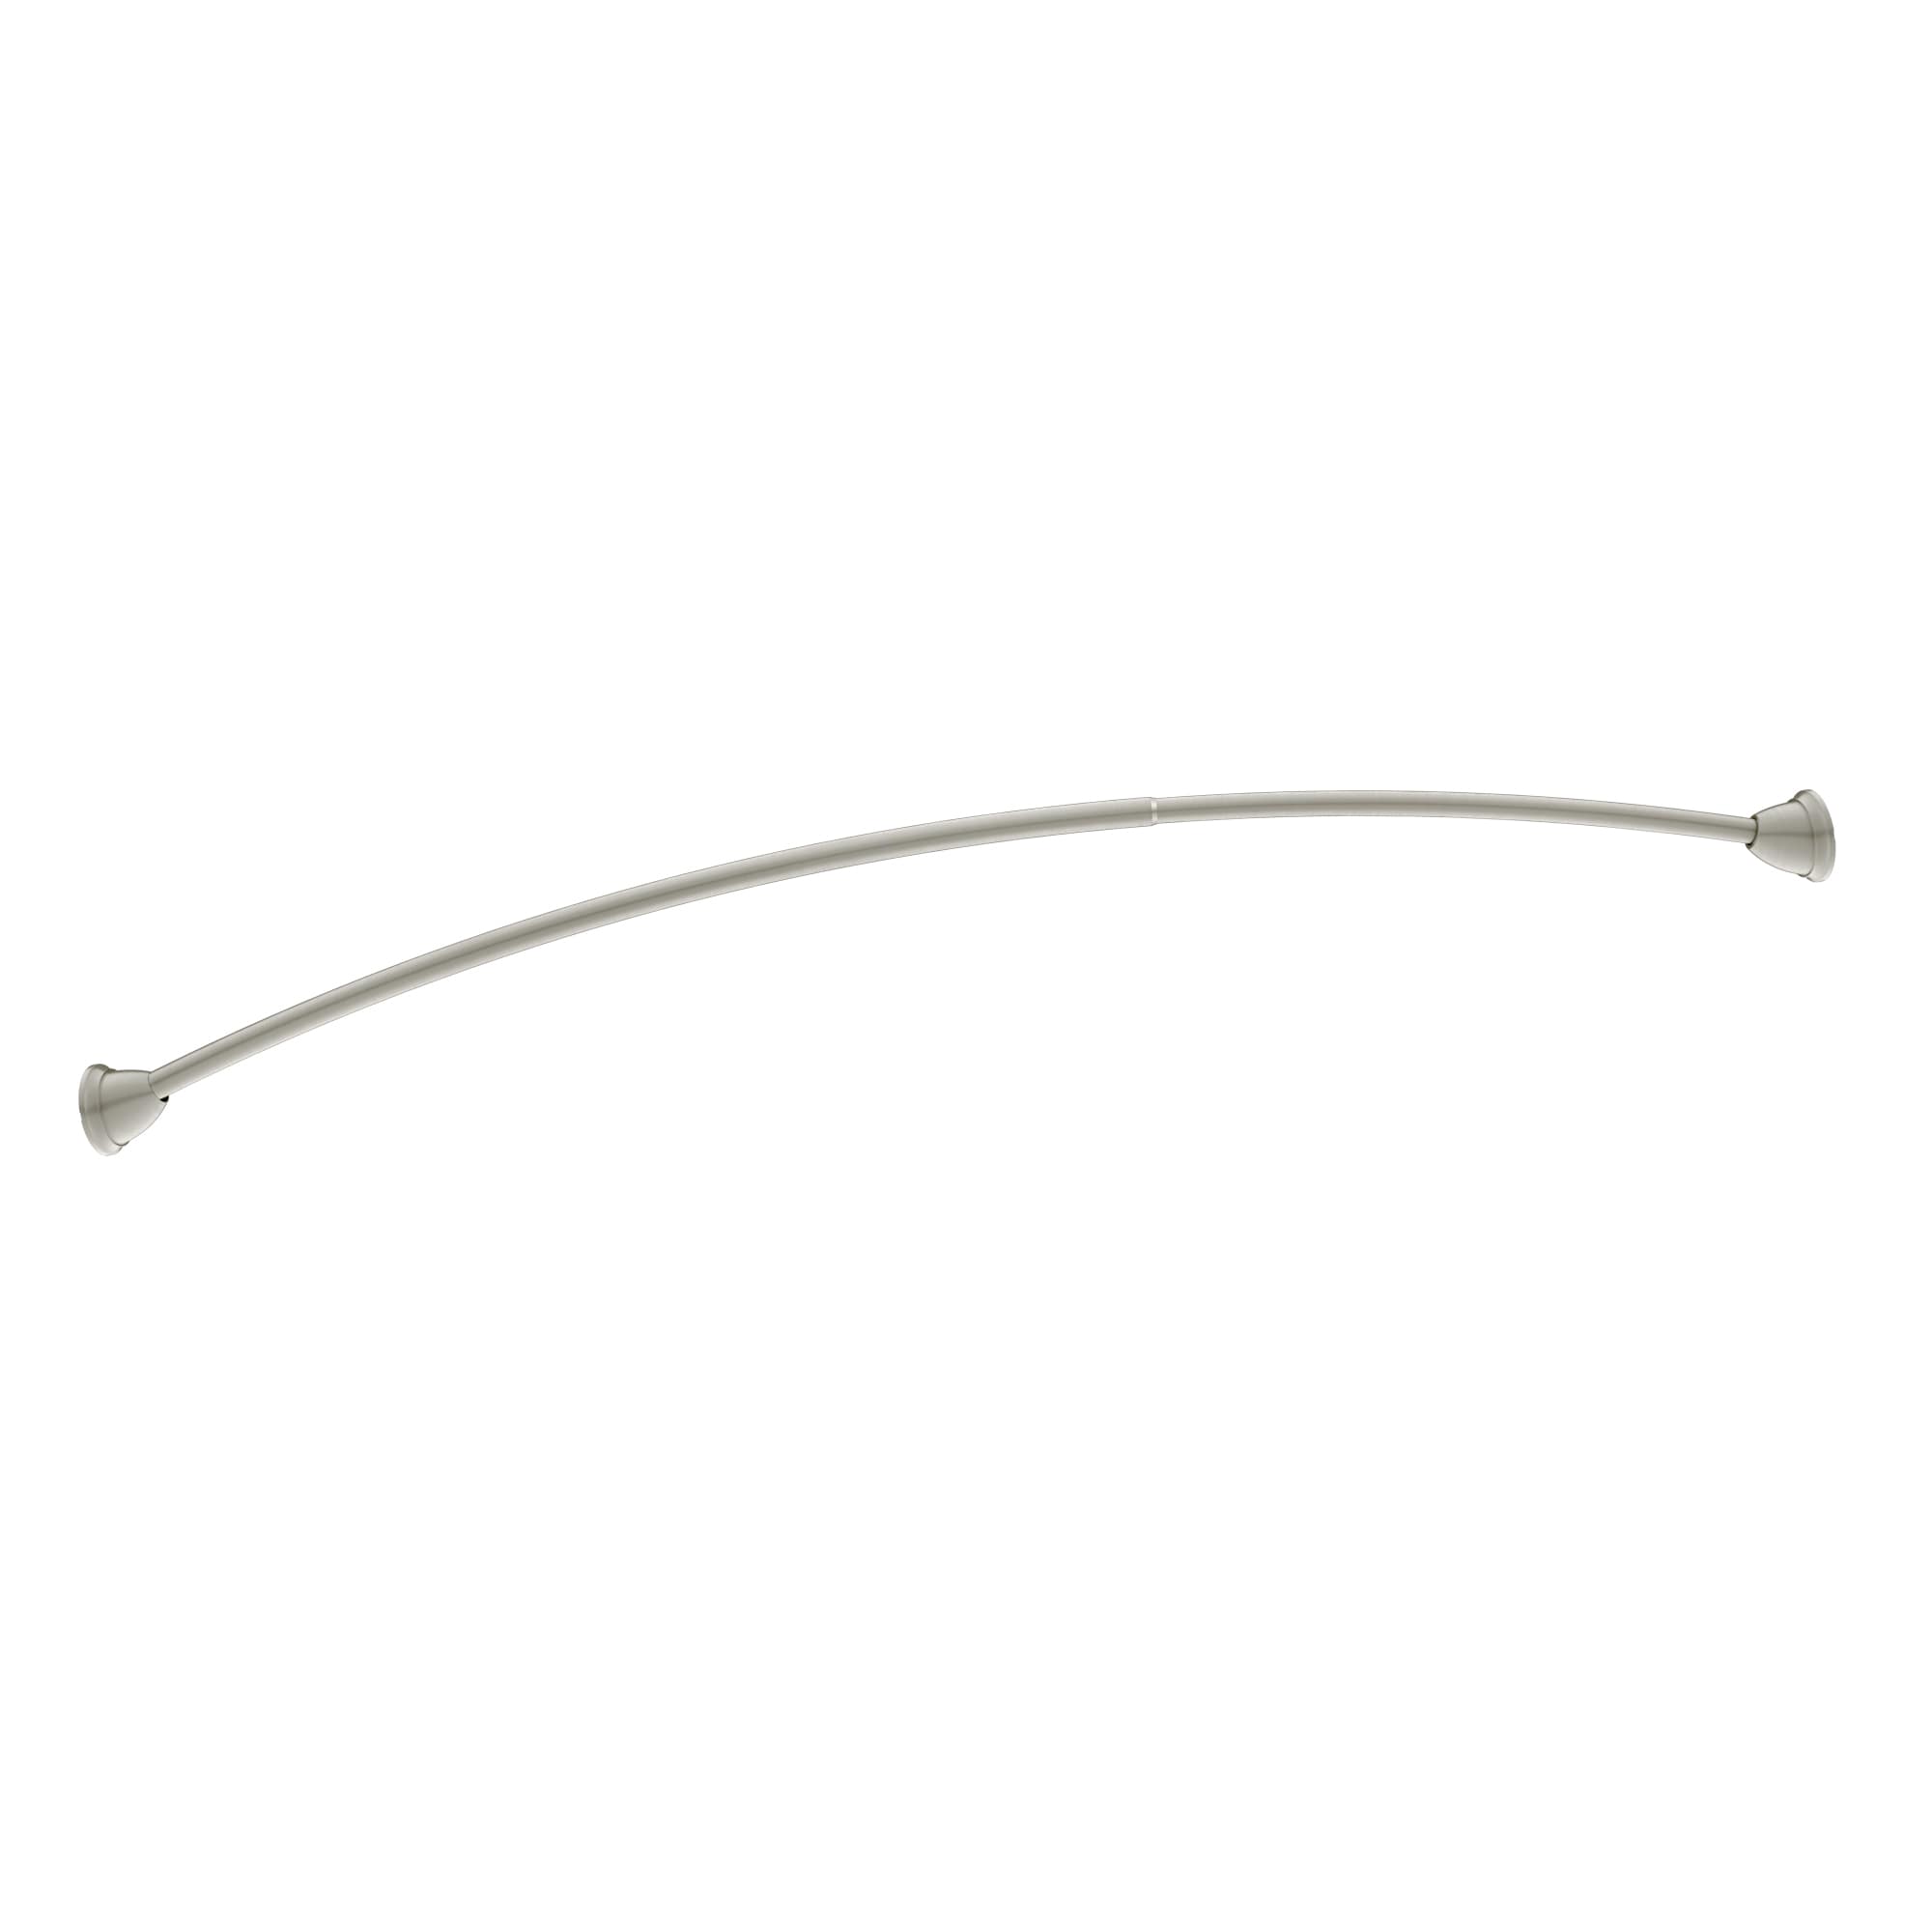 Large Safety Pins Pack of 40, Safety Pins Heavy Duty Assorted (2 inch, 2.5 inch, 3 inch), Blanket Pins Stainless Steel Wire Safety Pin Extra Sturdy